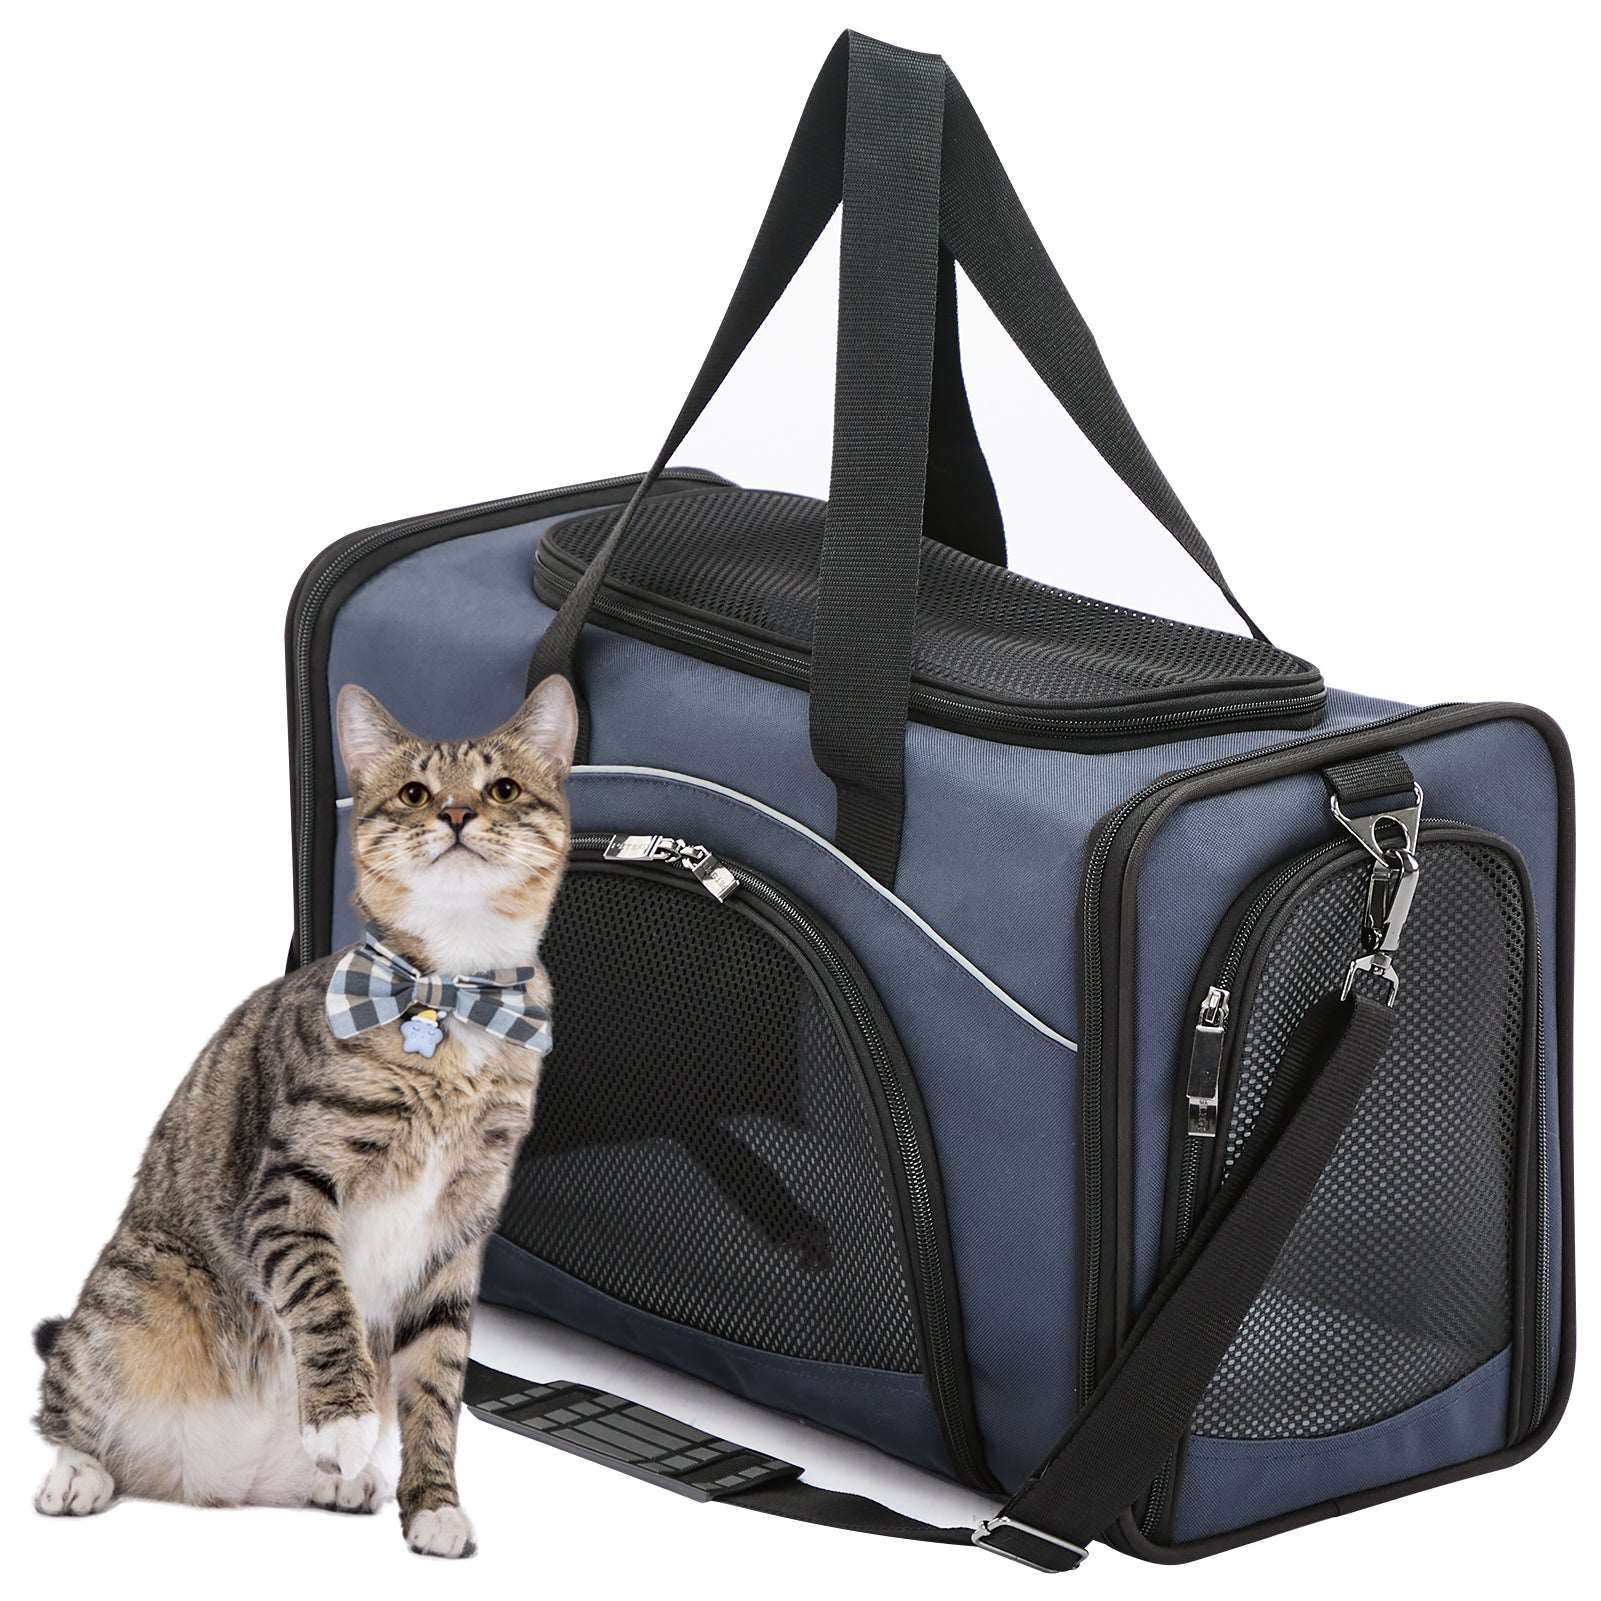 Petsfit-Pet-Carrier-Airline-Approved-10